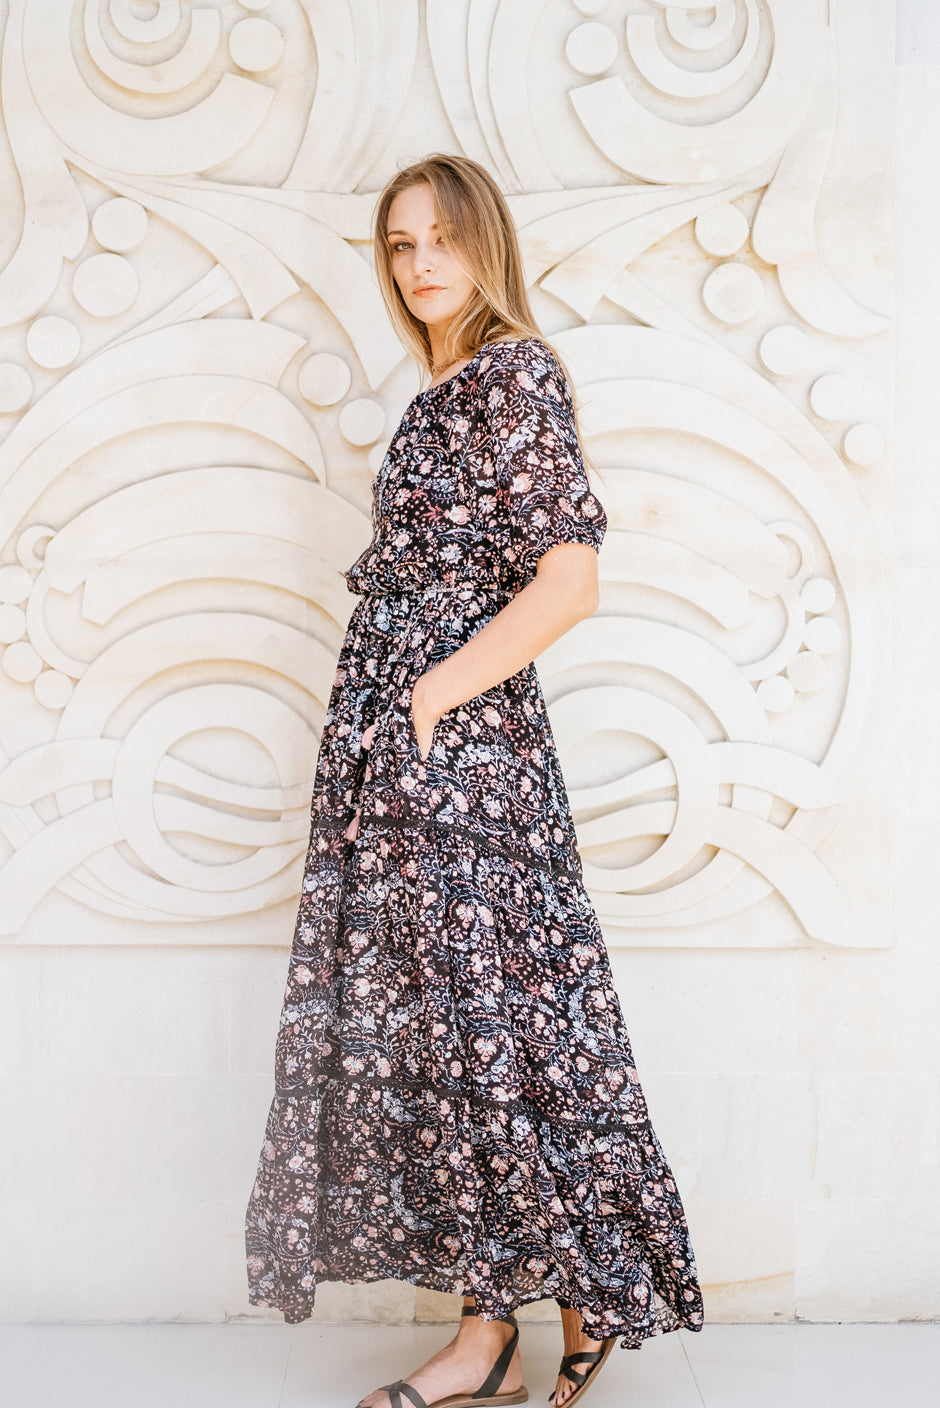 Purple/Blue/Pink Bohemian Floral Paisley Print Spring/Summer 2022 Ethical Sustainable Elegant Luxury Fashion Jessa Maxi Dress from Paneros Clothing. Side View with stretchy smocking at waist and border details. Styled on-the-shoulders.